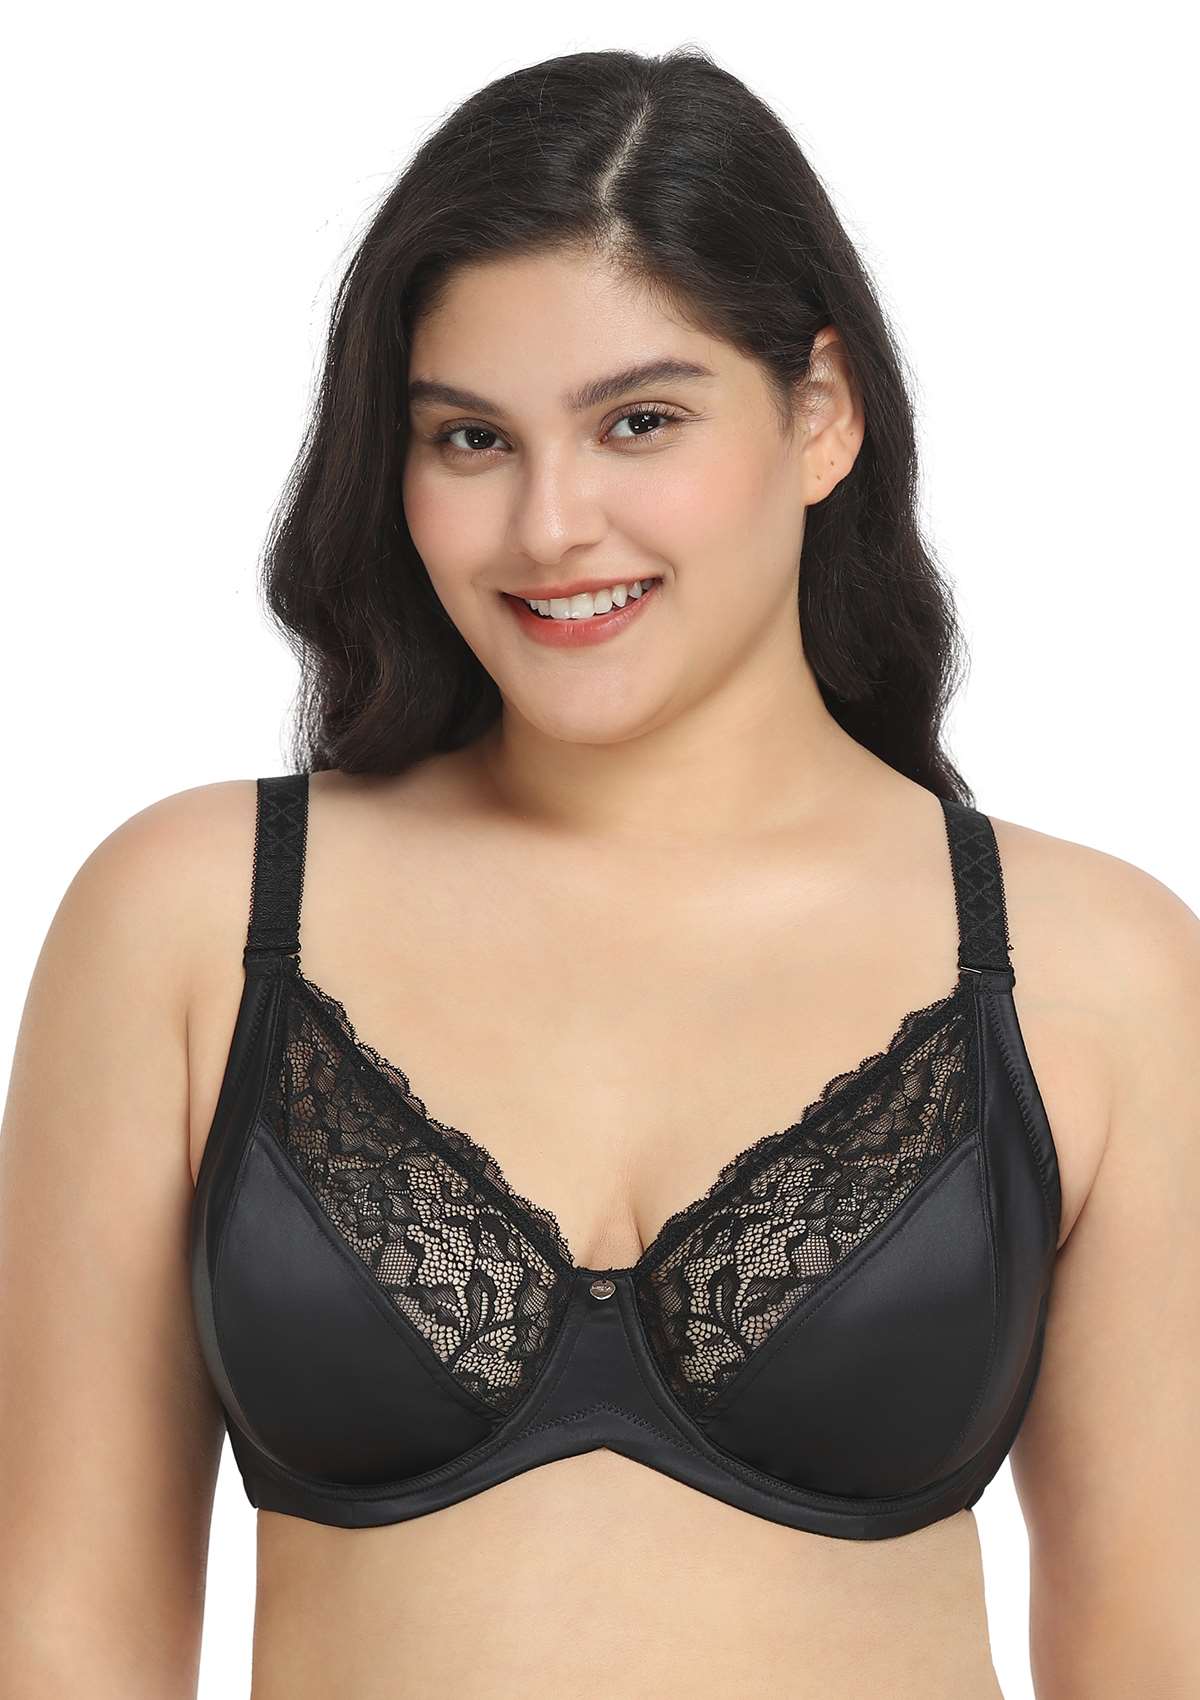 HSIA Foxy Satin Silky Full Coverage Underwire Bra With Floral Lace Trim - Black / 42 / G